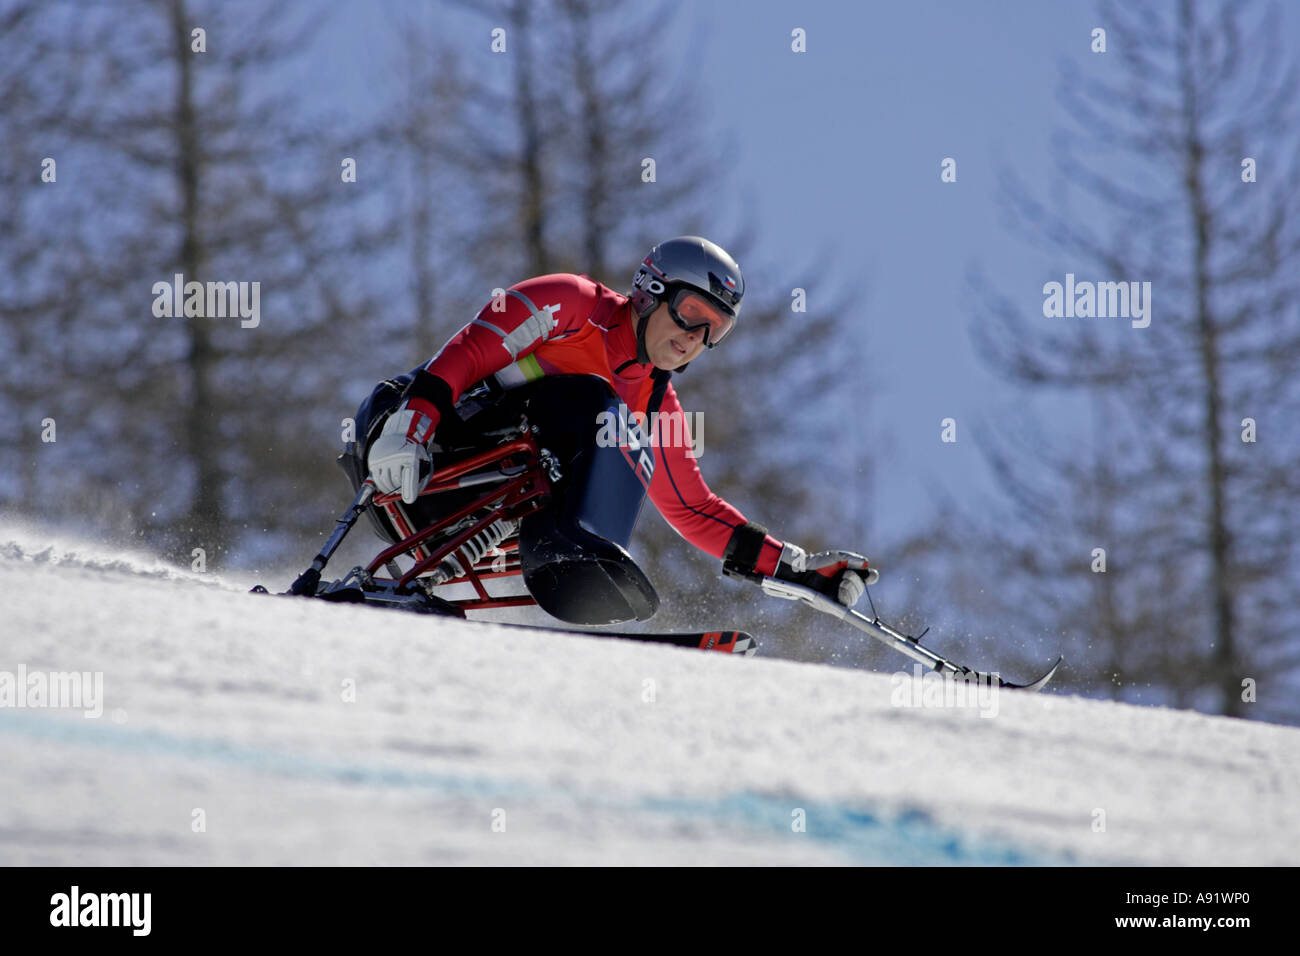 Radim Kozlovsky LW10-2 of the Czech Republic in the Mens Alpine Skiing Super G Sitting competition Stock Photo